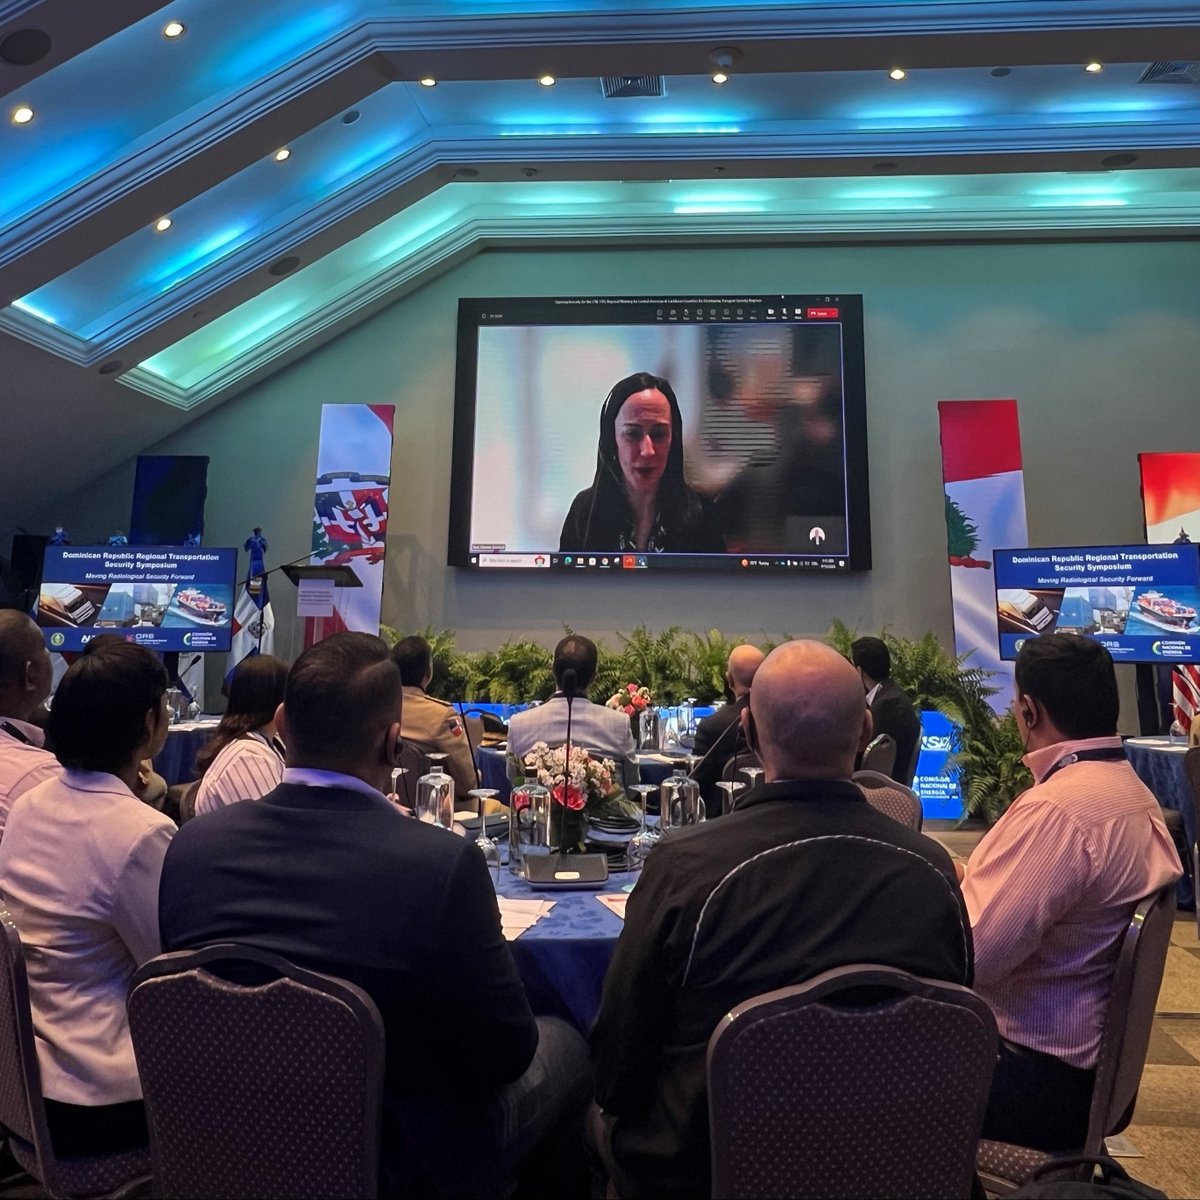 #NNSA’s Office of Radiological Security is partnering with the Dominican Republic’s Comisión Nacional de Energía to conduct a regional workshop where Global Materials Security lead Christine Bent spoke on transport security and our mission of #RadSecurity worldwide.